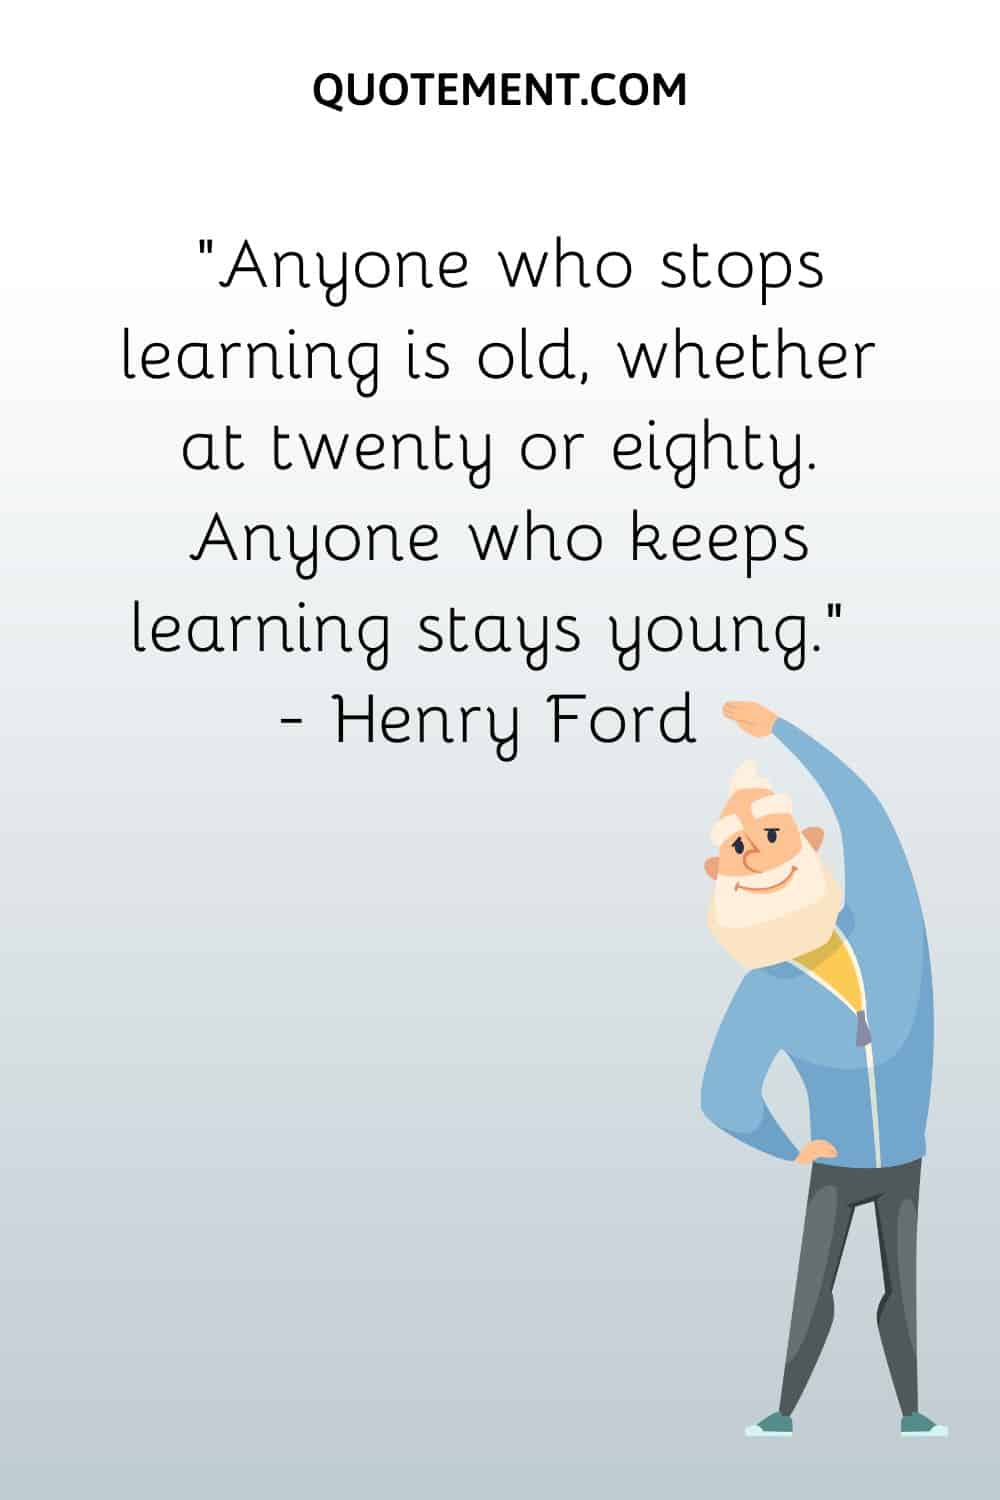 Anyone who stops learning is old, whether at twenty or eighty